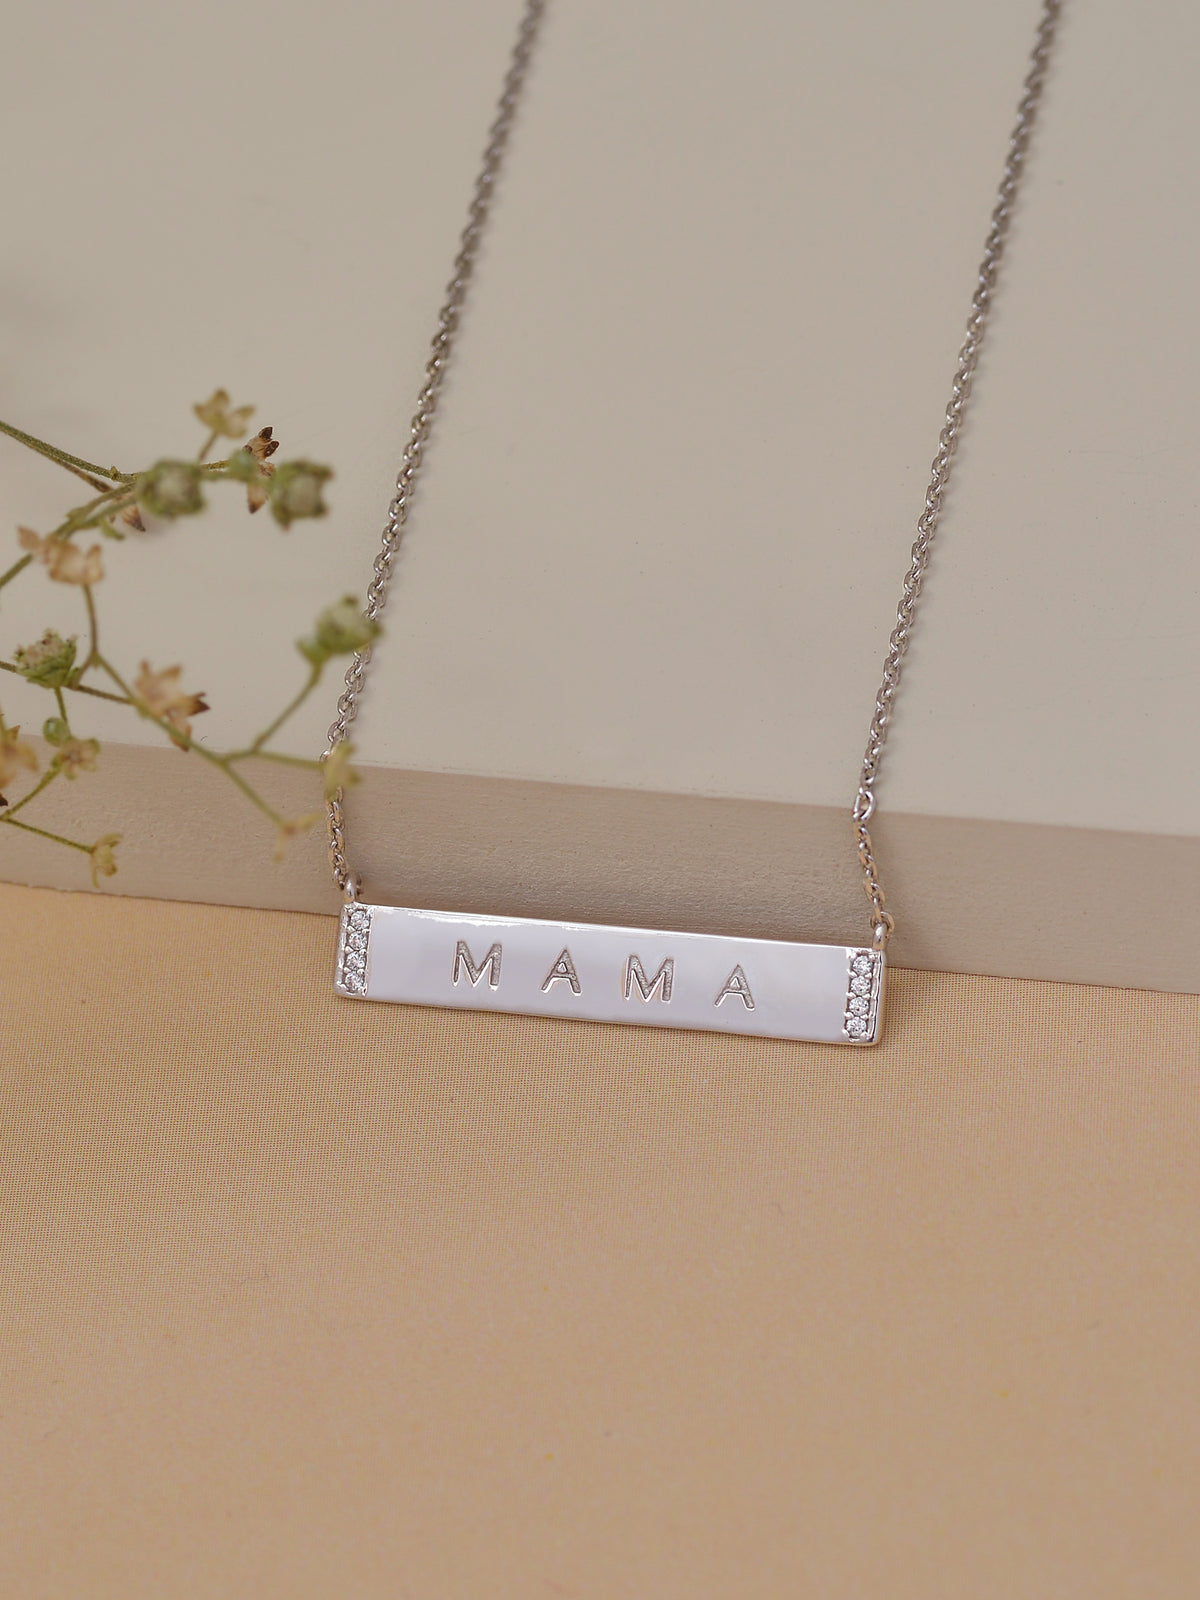 925 STERLING SILVER MAMA PENDANT NECKLACE FOR MOM